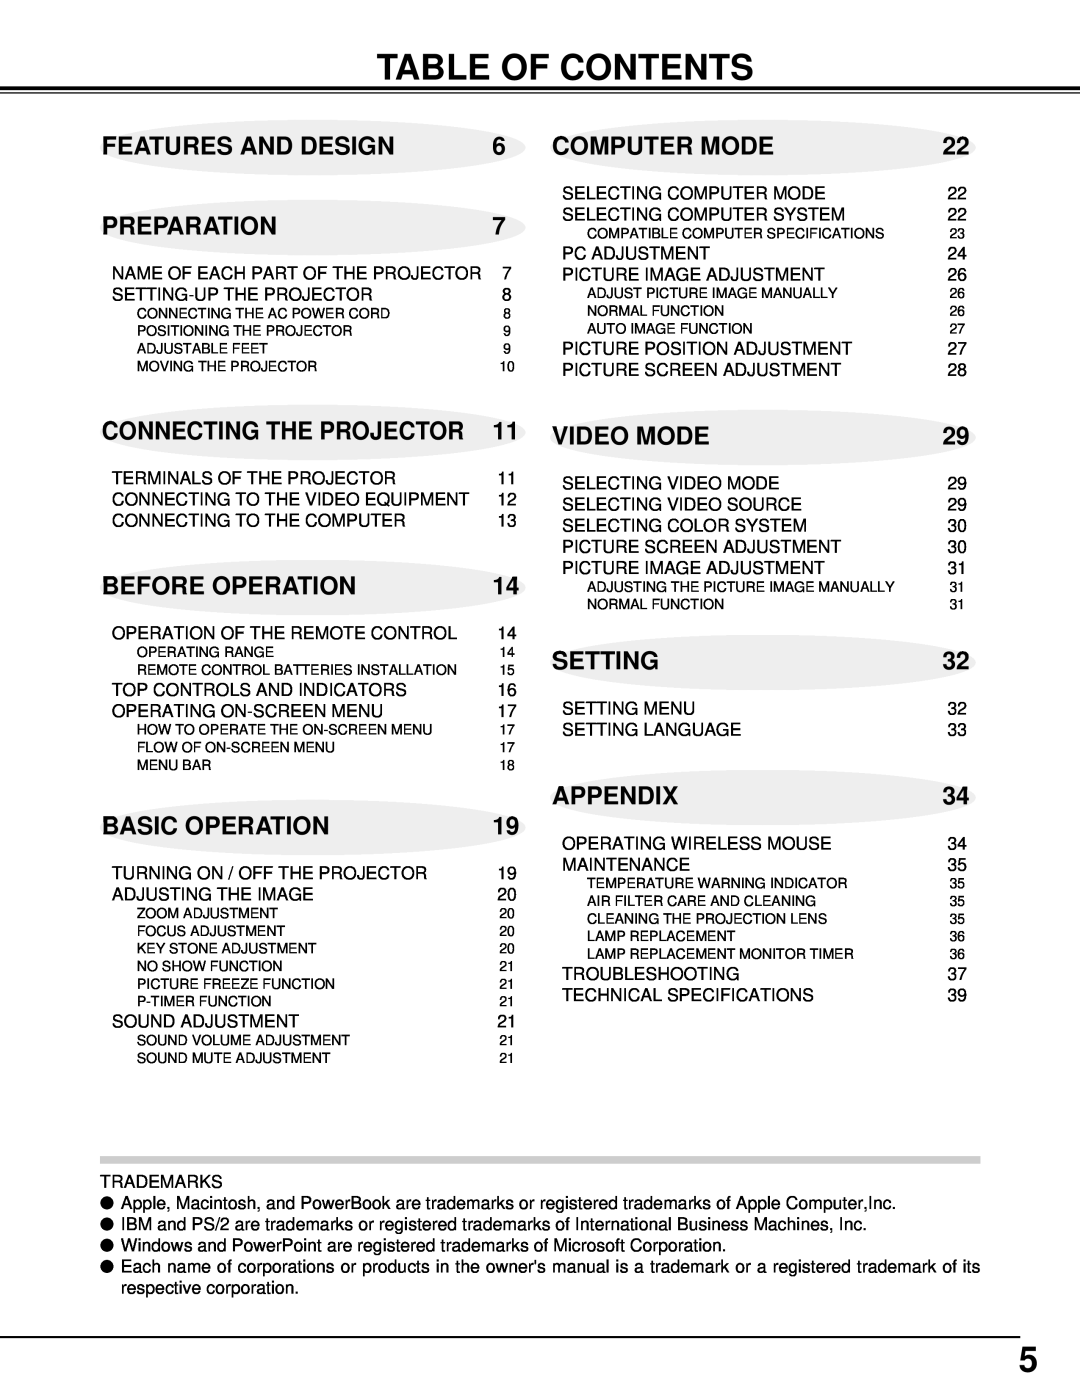 BOXLIGHT XP-5t Table Of Contents, Features And Design, Computer Mode, Preparation, Video Mode, Before Operation, Setting 